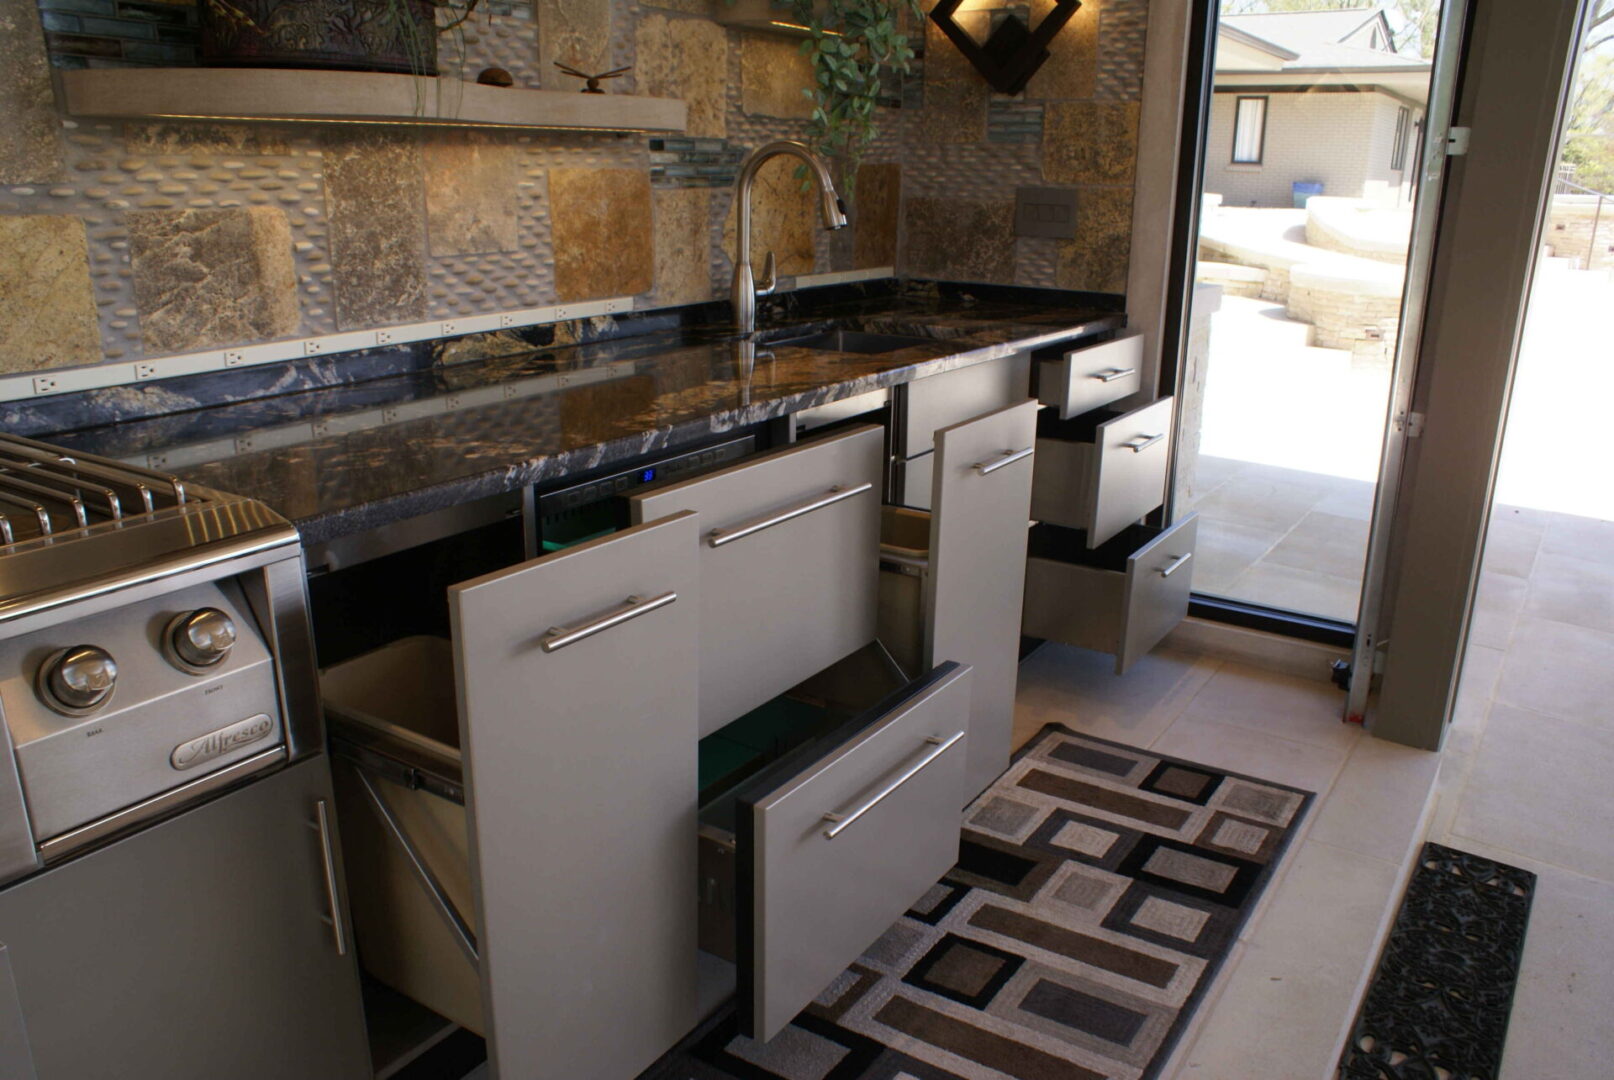 A kitchen with a sink and dishwasher in it